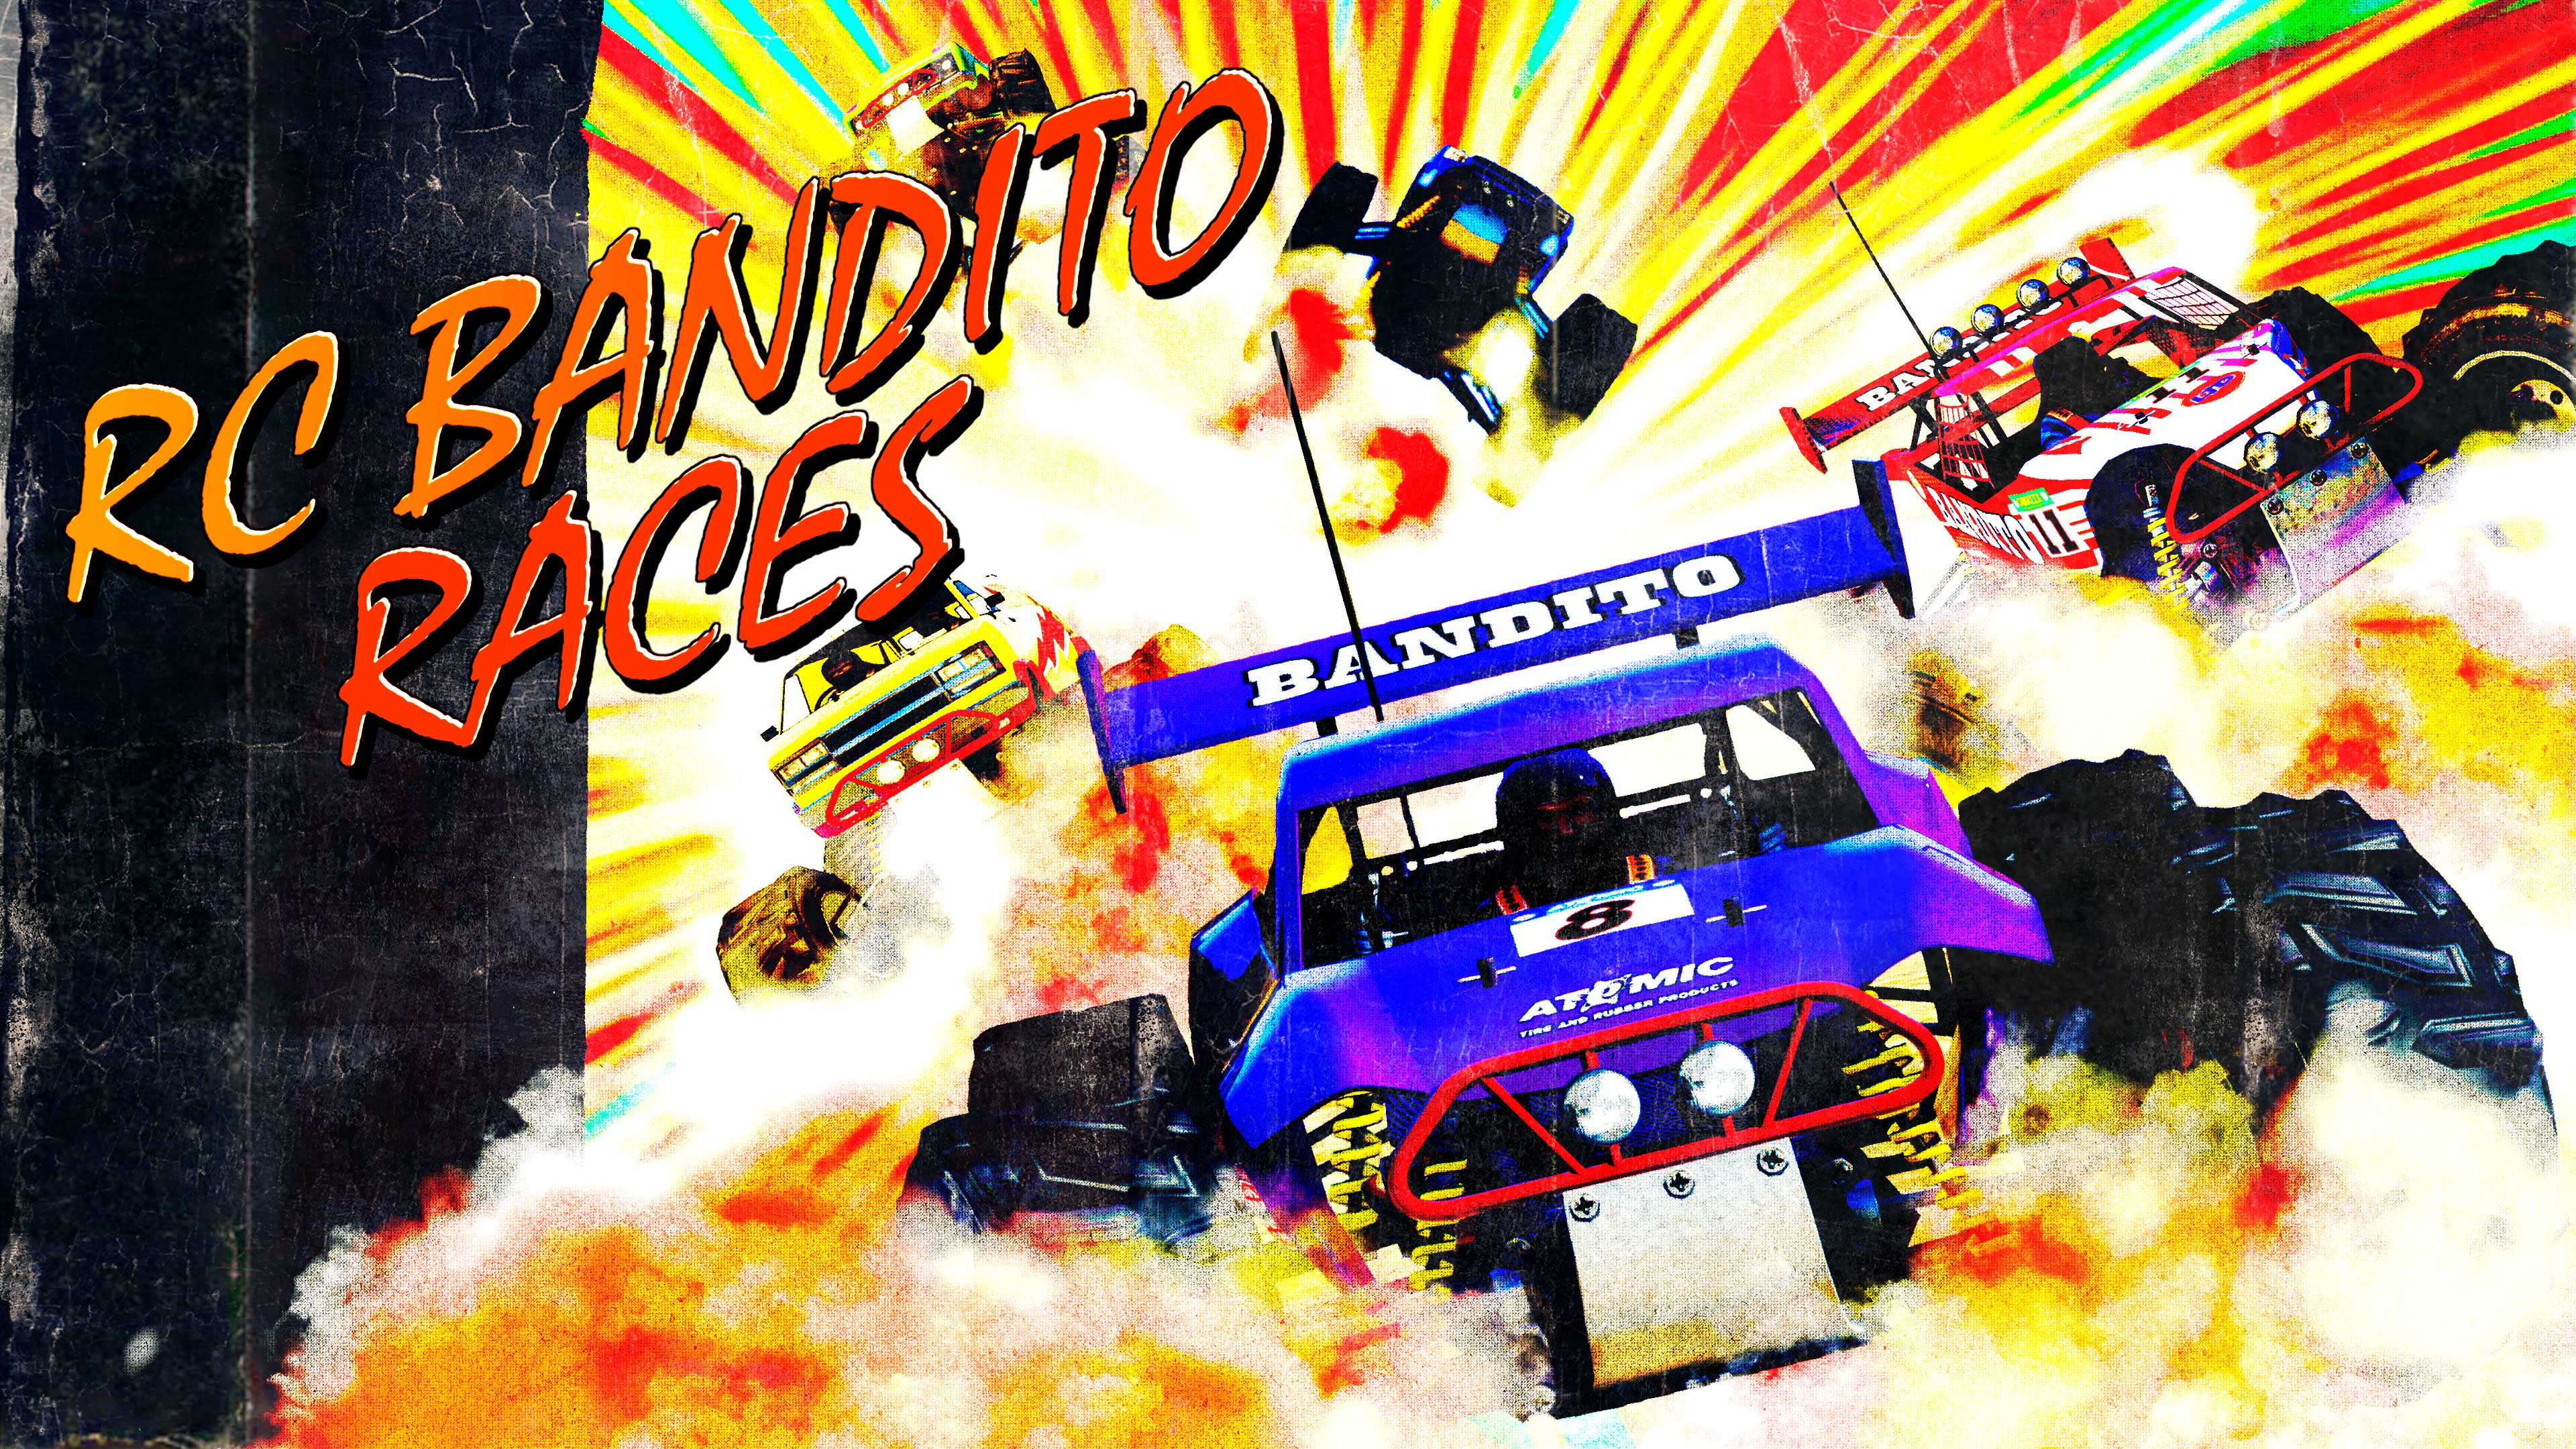 2x and rp on rc bandito races